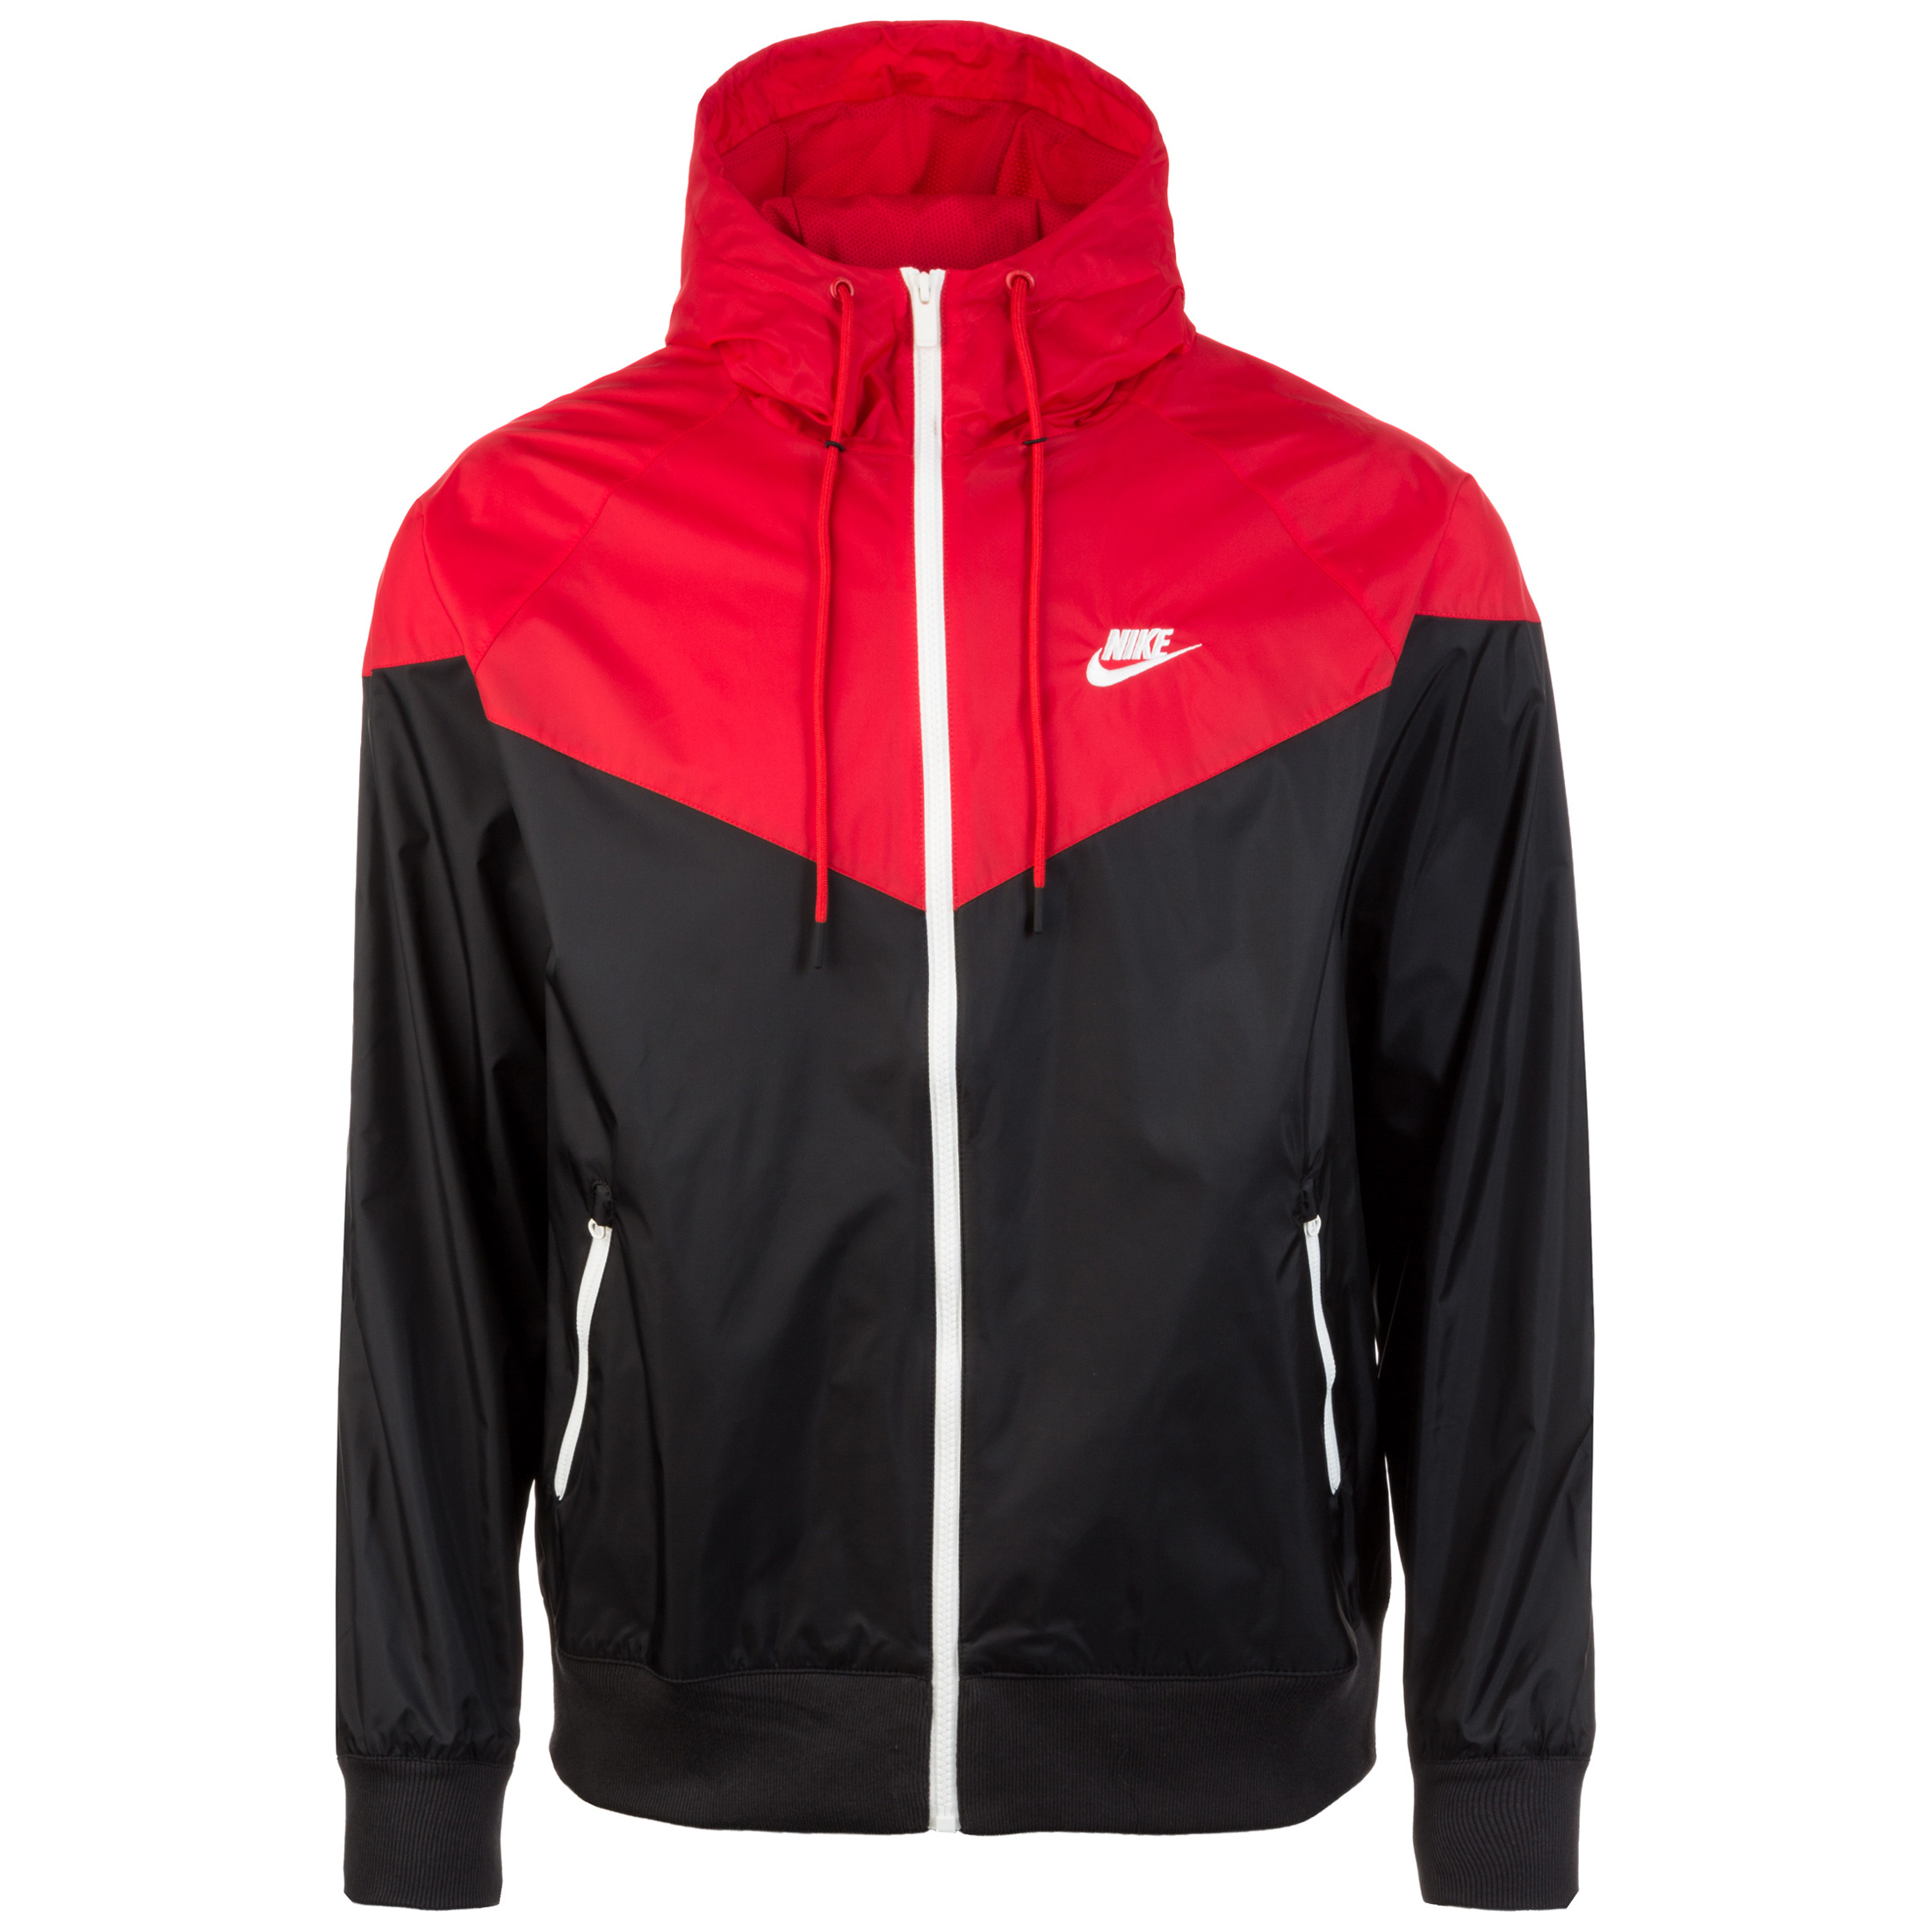 nike jacket black and red